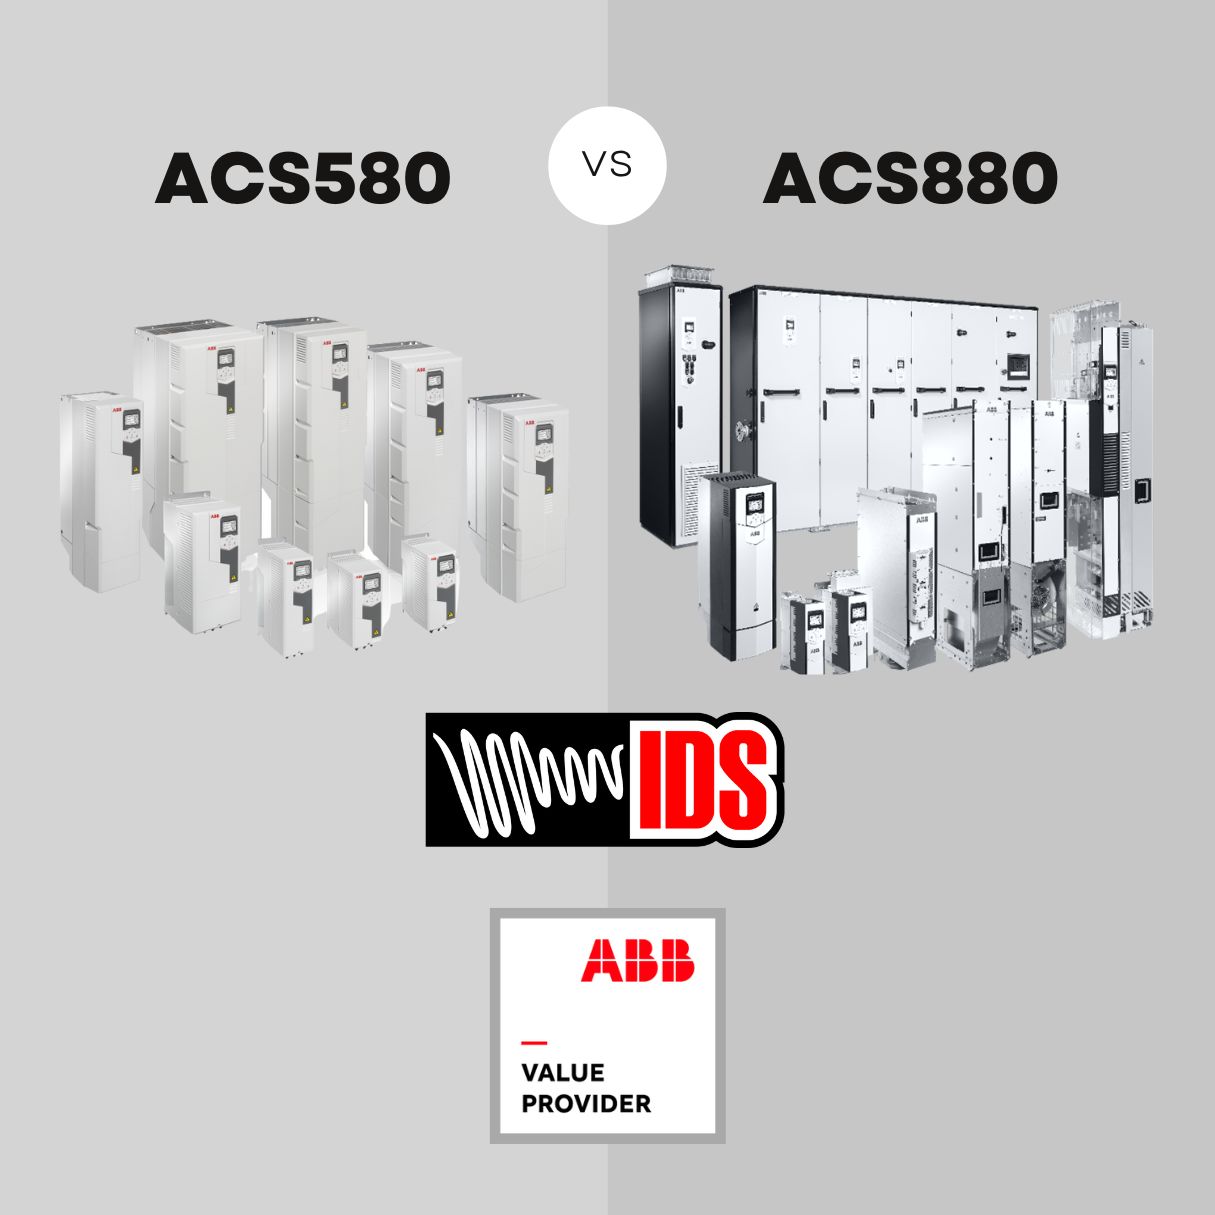 ABB Drives ACS580 or ACS880 - What are the differences?